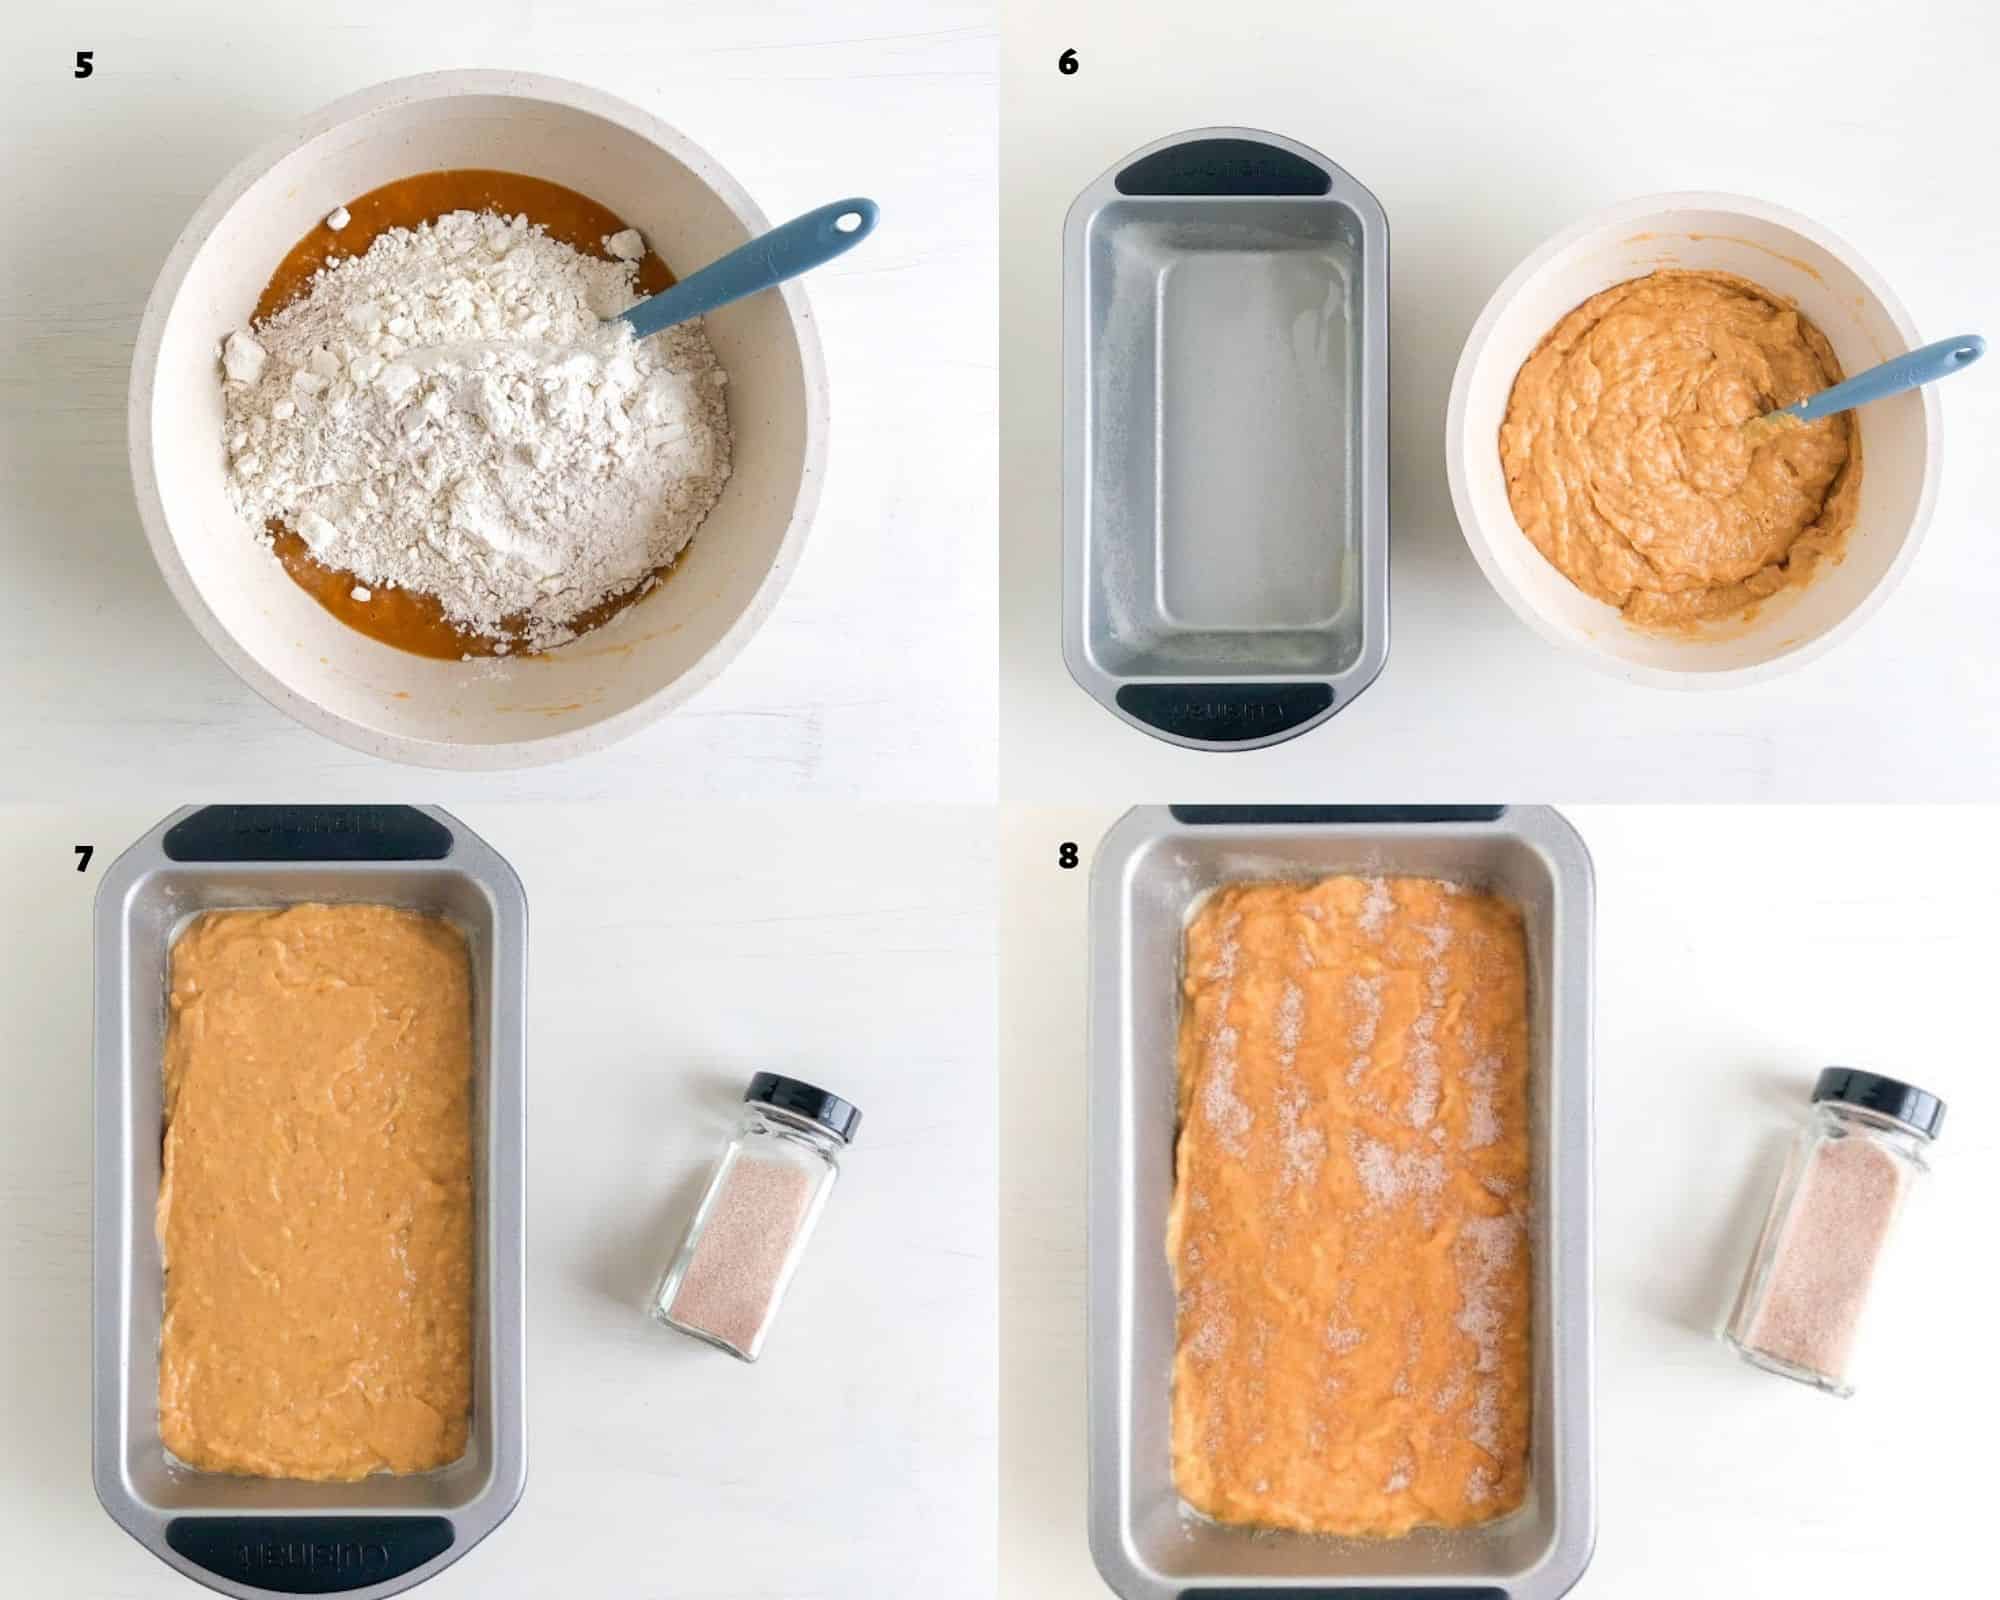 Process shots for making bread batter